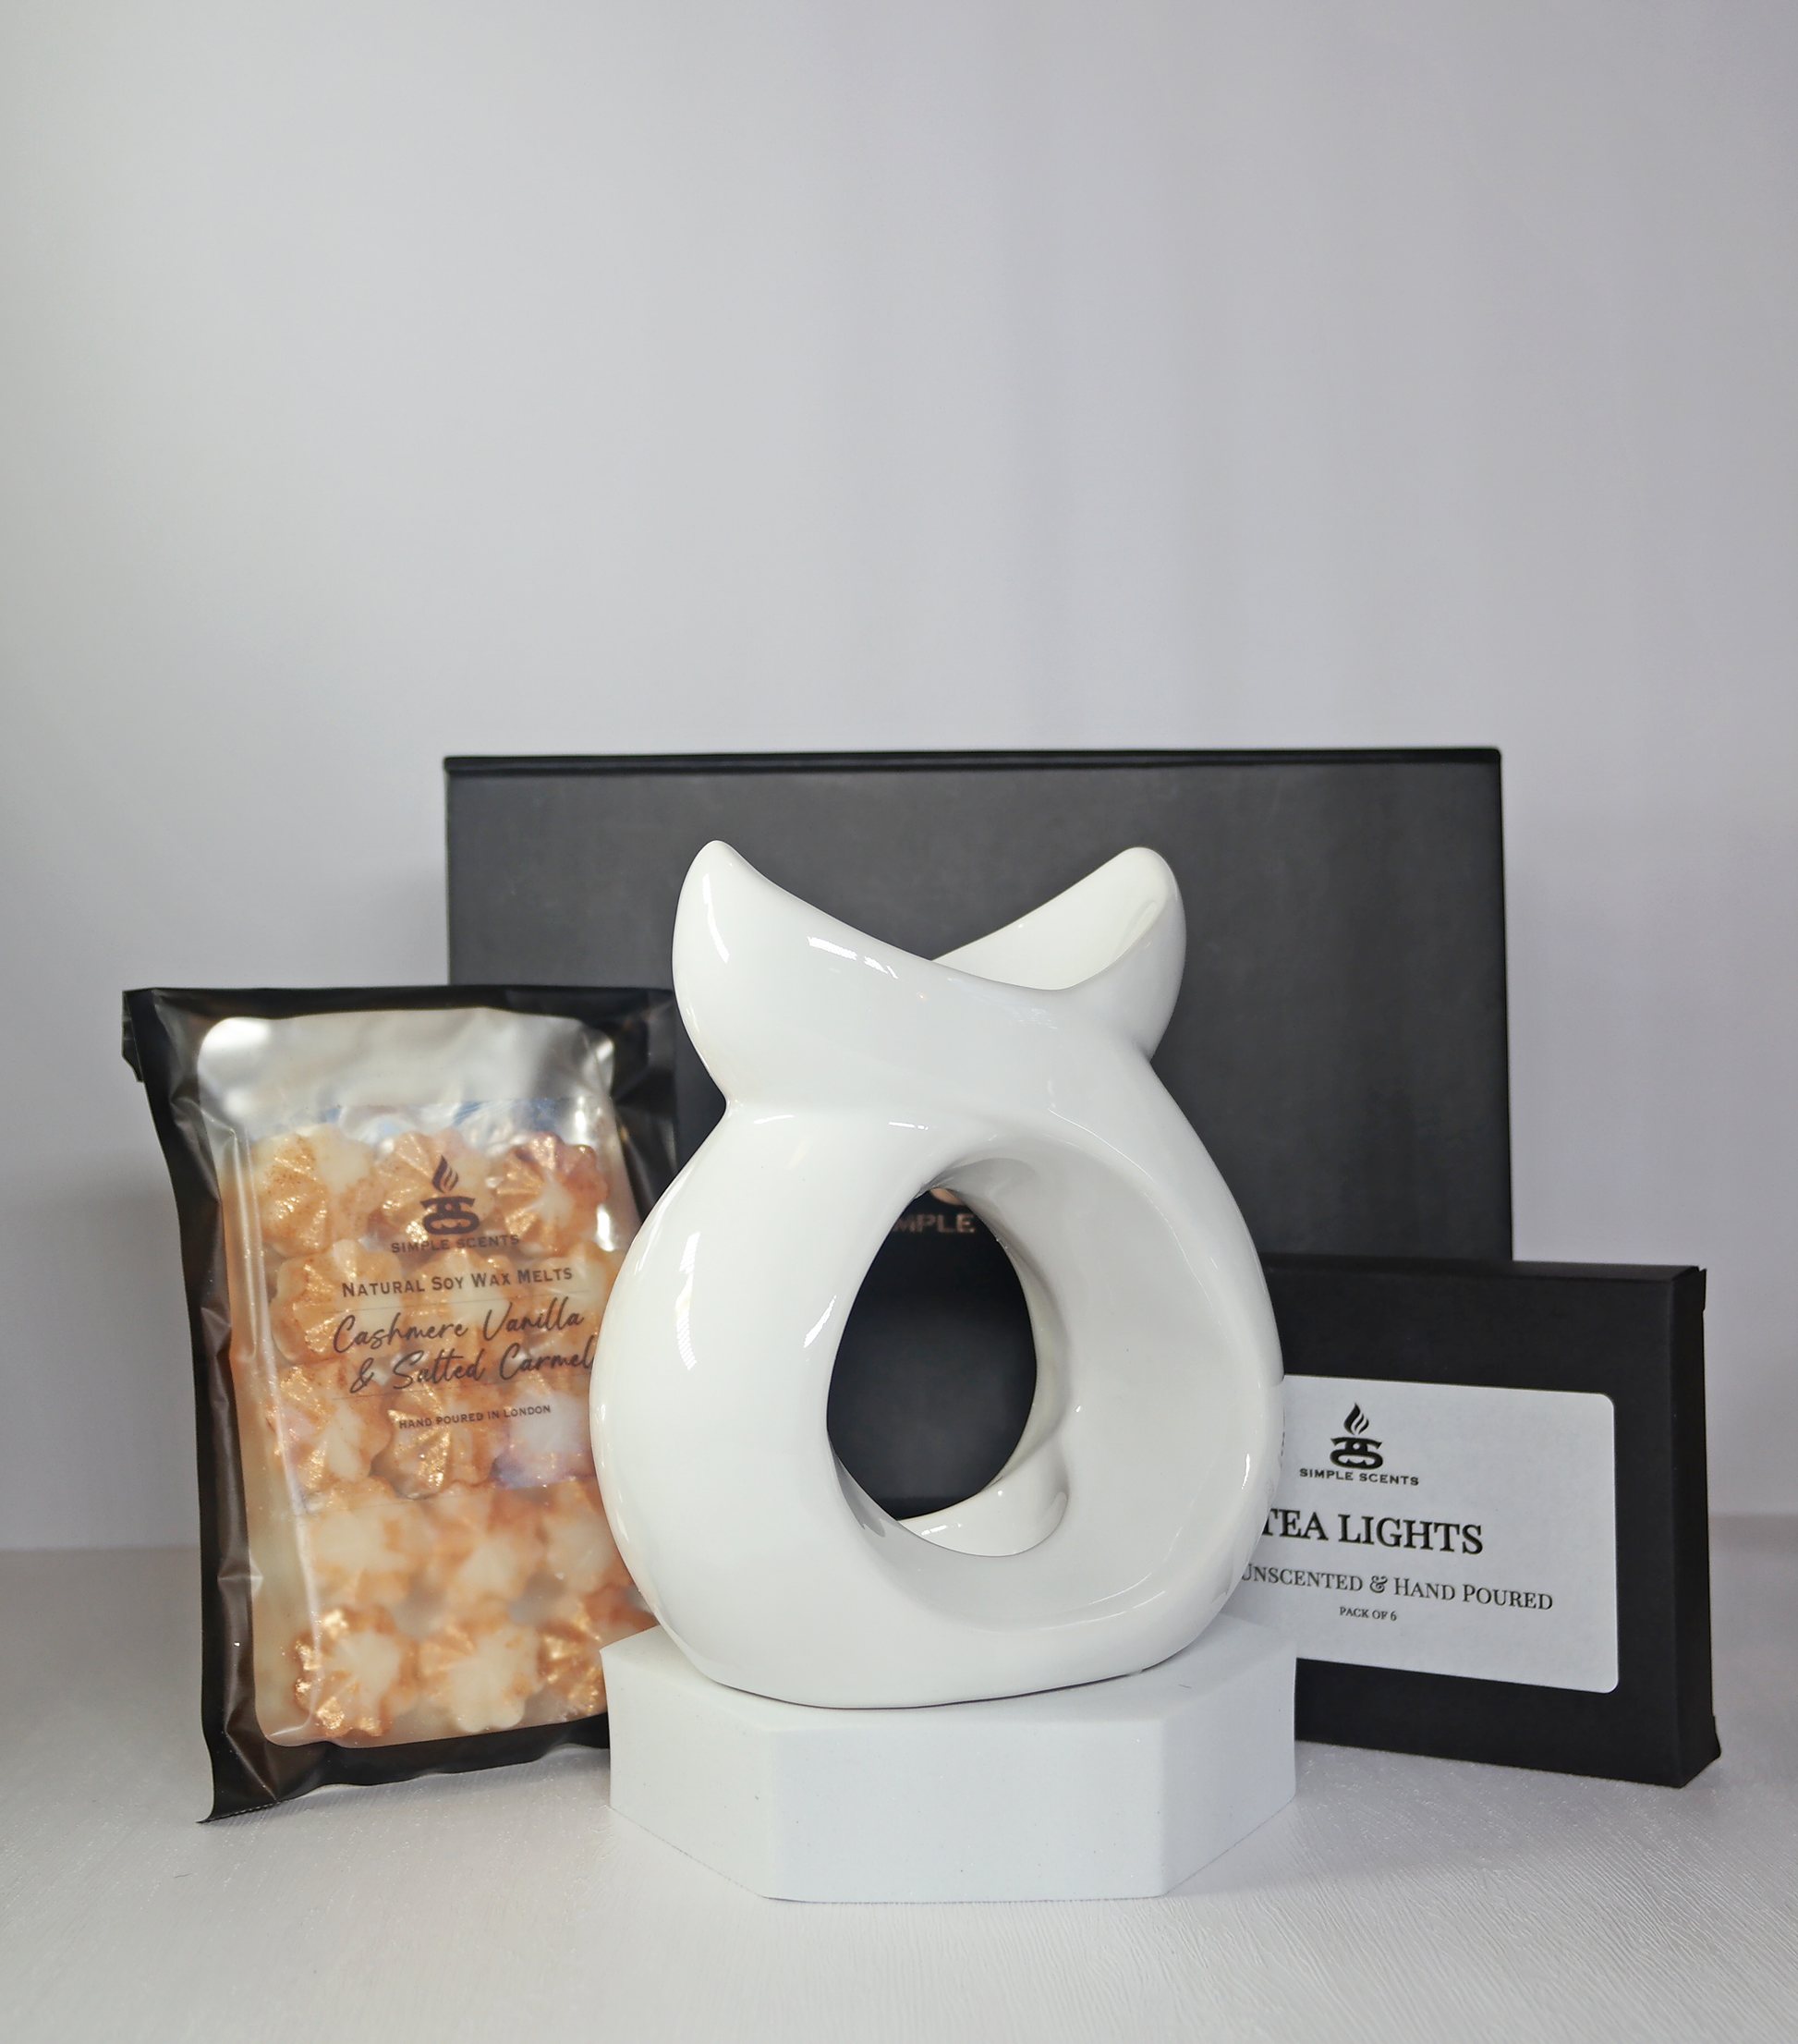 Our wax melt gift sets are a perfect gift – Serathena